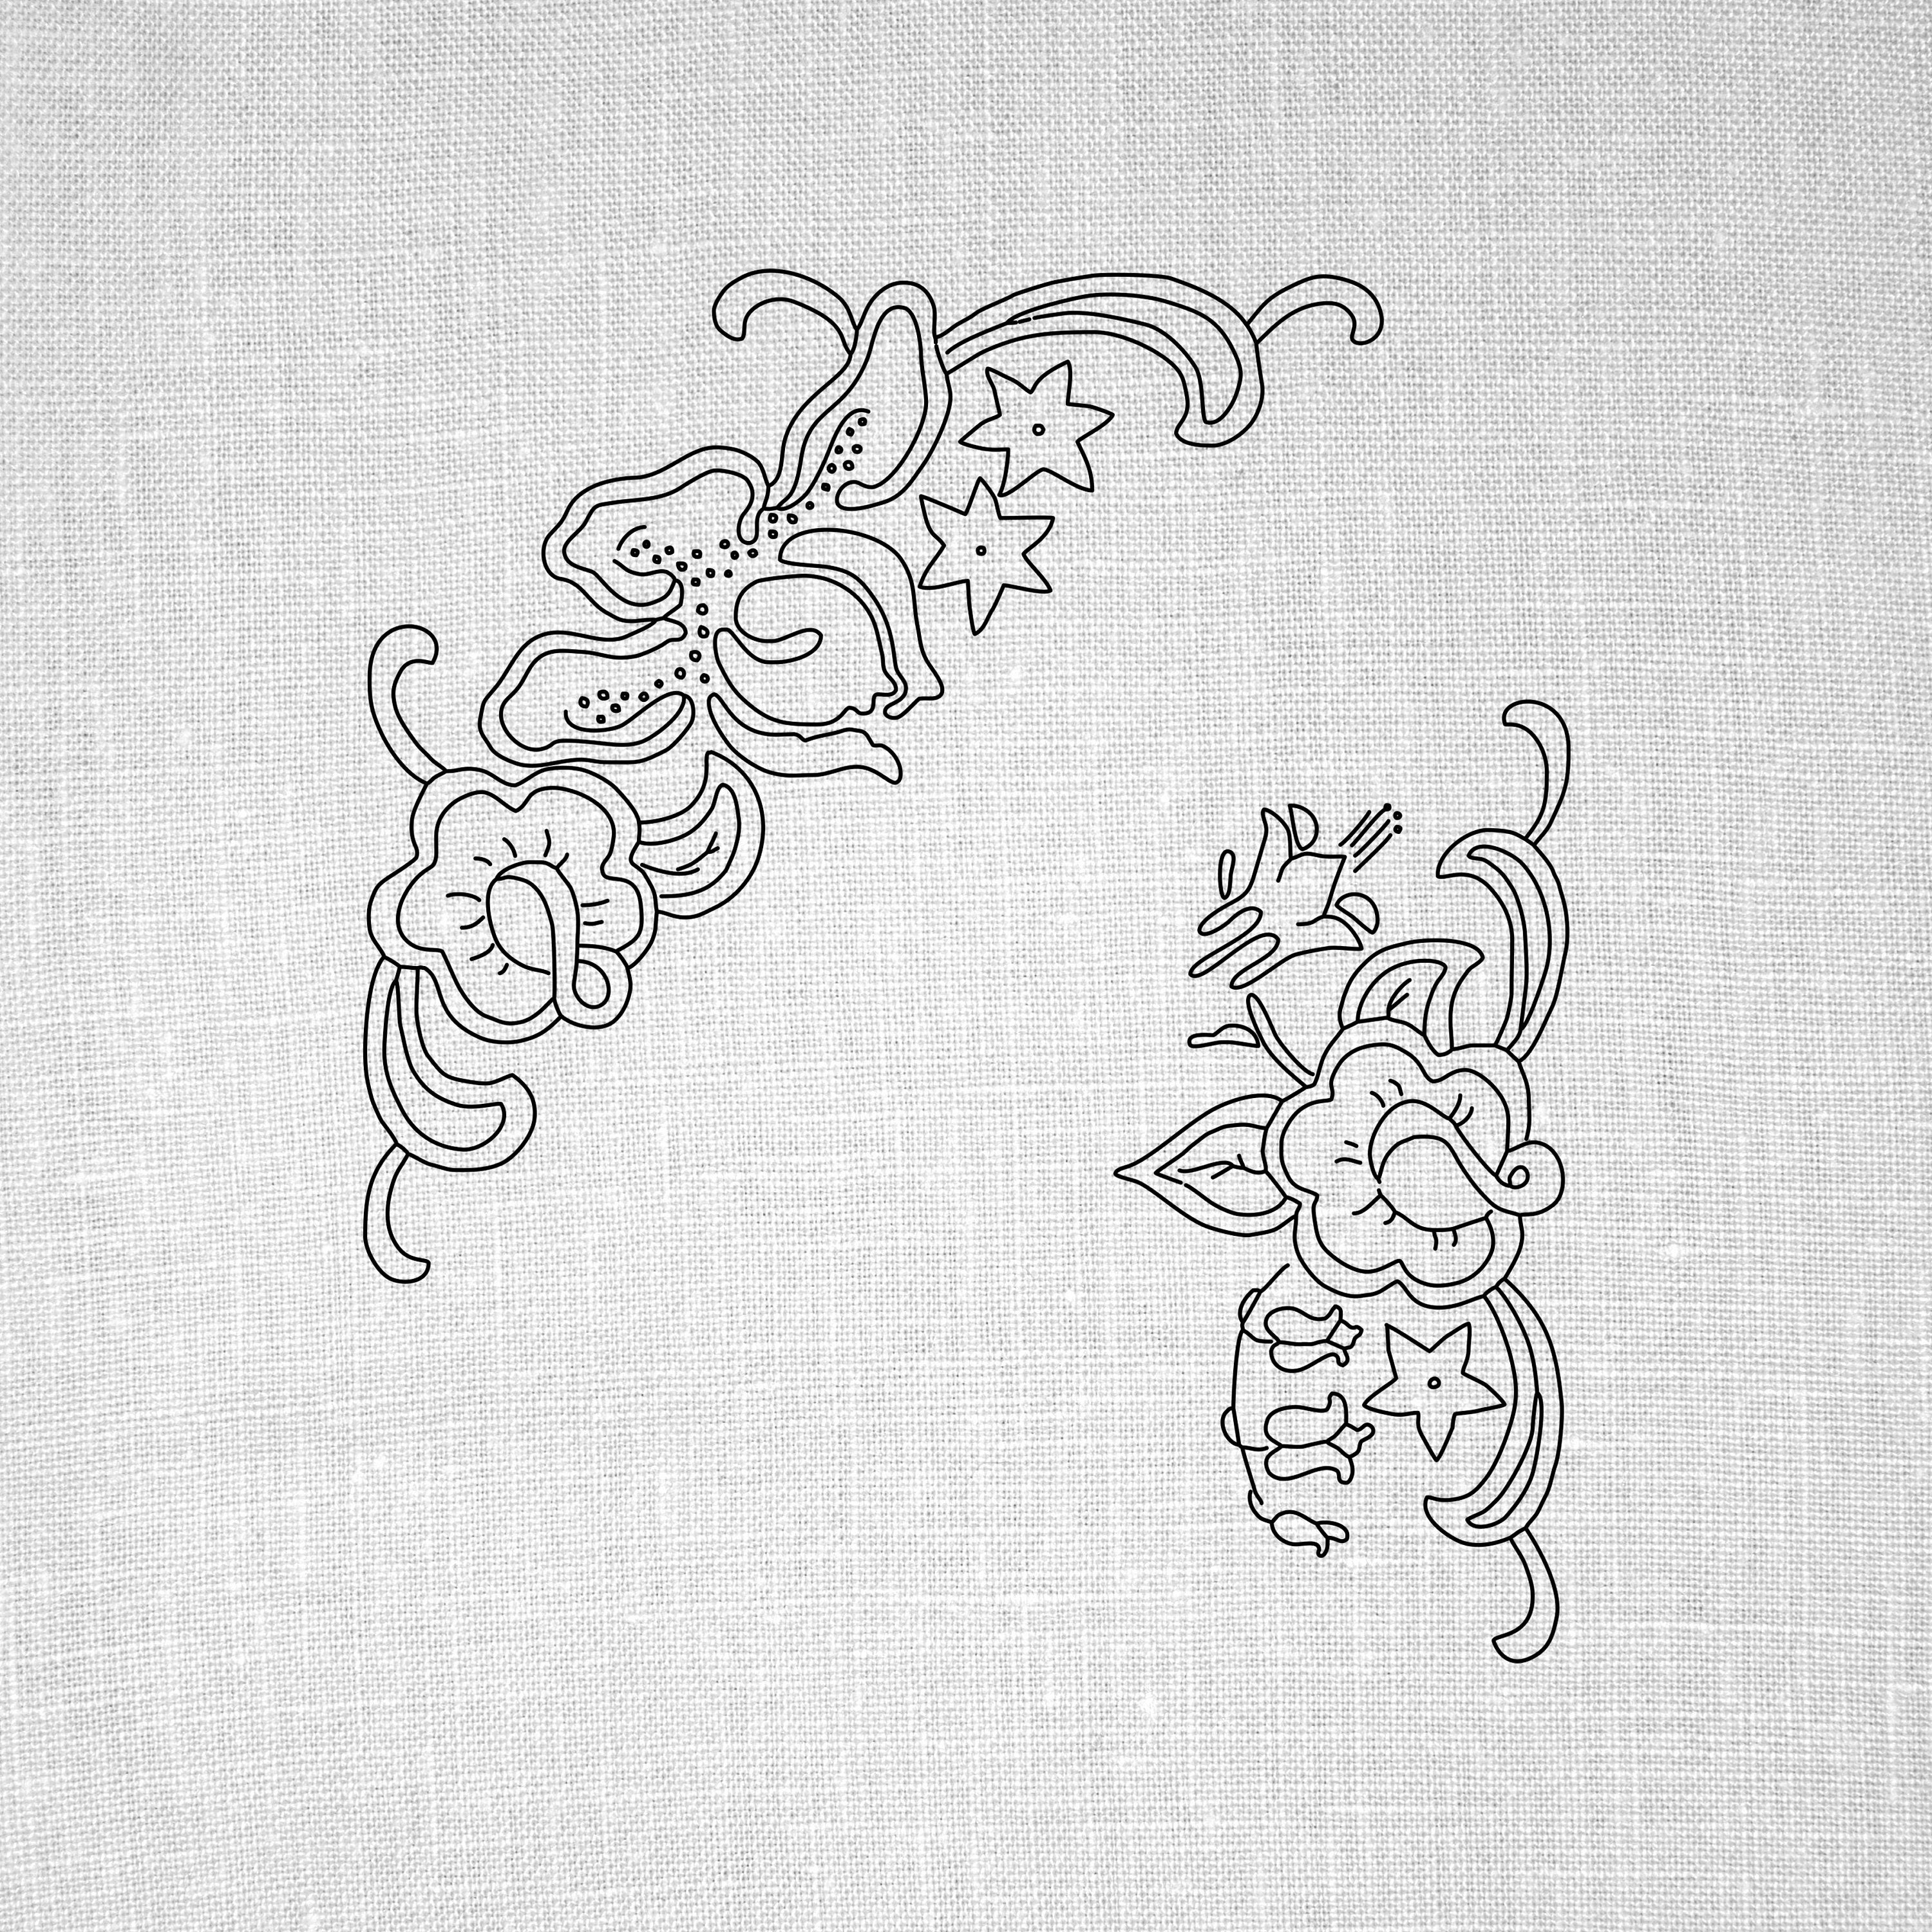 Vintage Hand Embroidery Patterns Hand Embroidery Borders Hand Embroidery Embroidery Design Hand Embroidery Patterns Pdf Vintage Transfers Cowboy Border